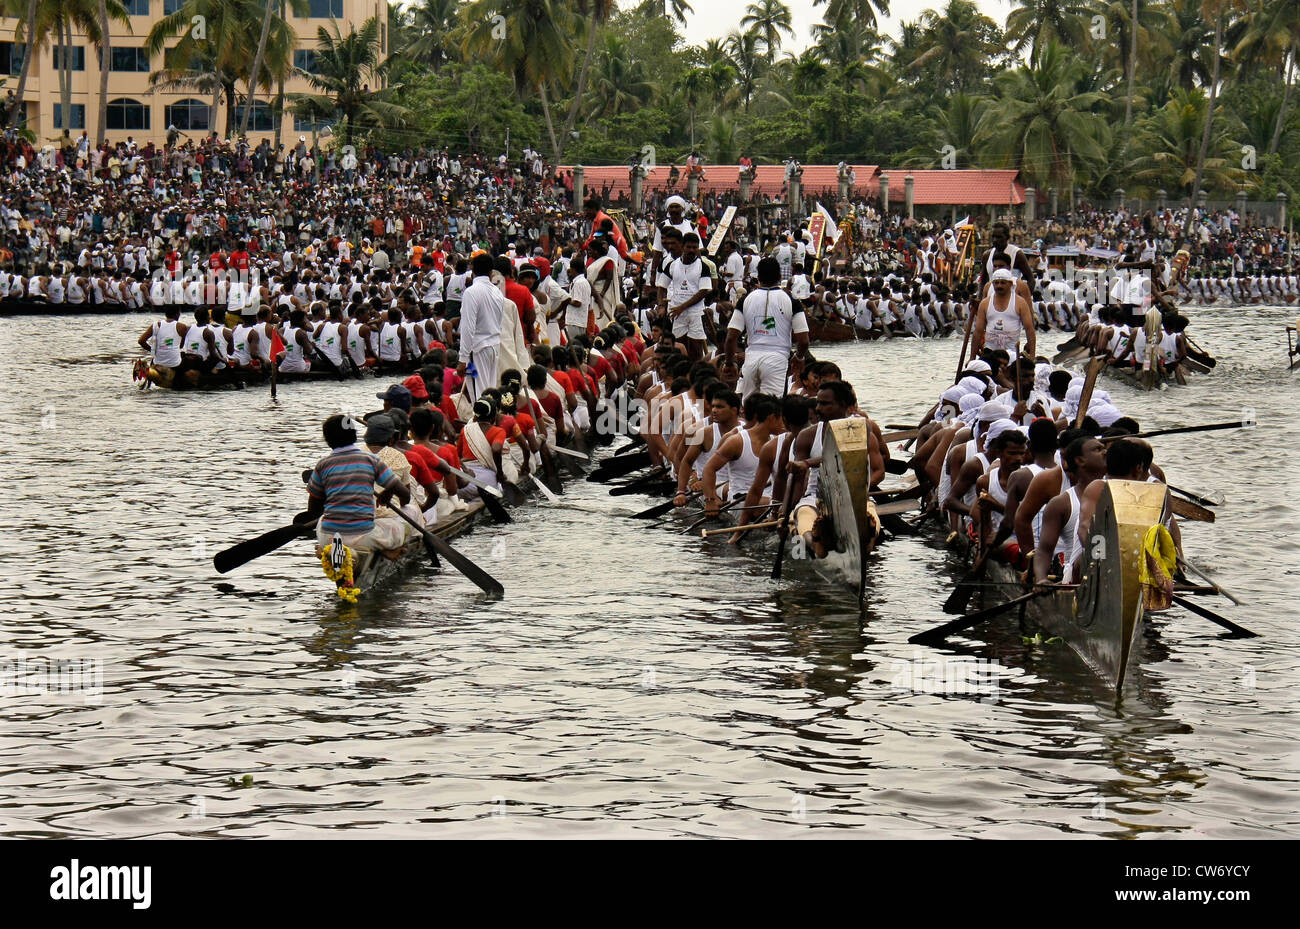 rowers doing mass drill from nehrutrophy snake boat race or chundan vallam in alappuzha  formerly known as alleppey,kerala,india Stock Photo